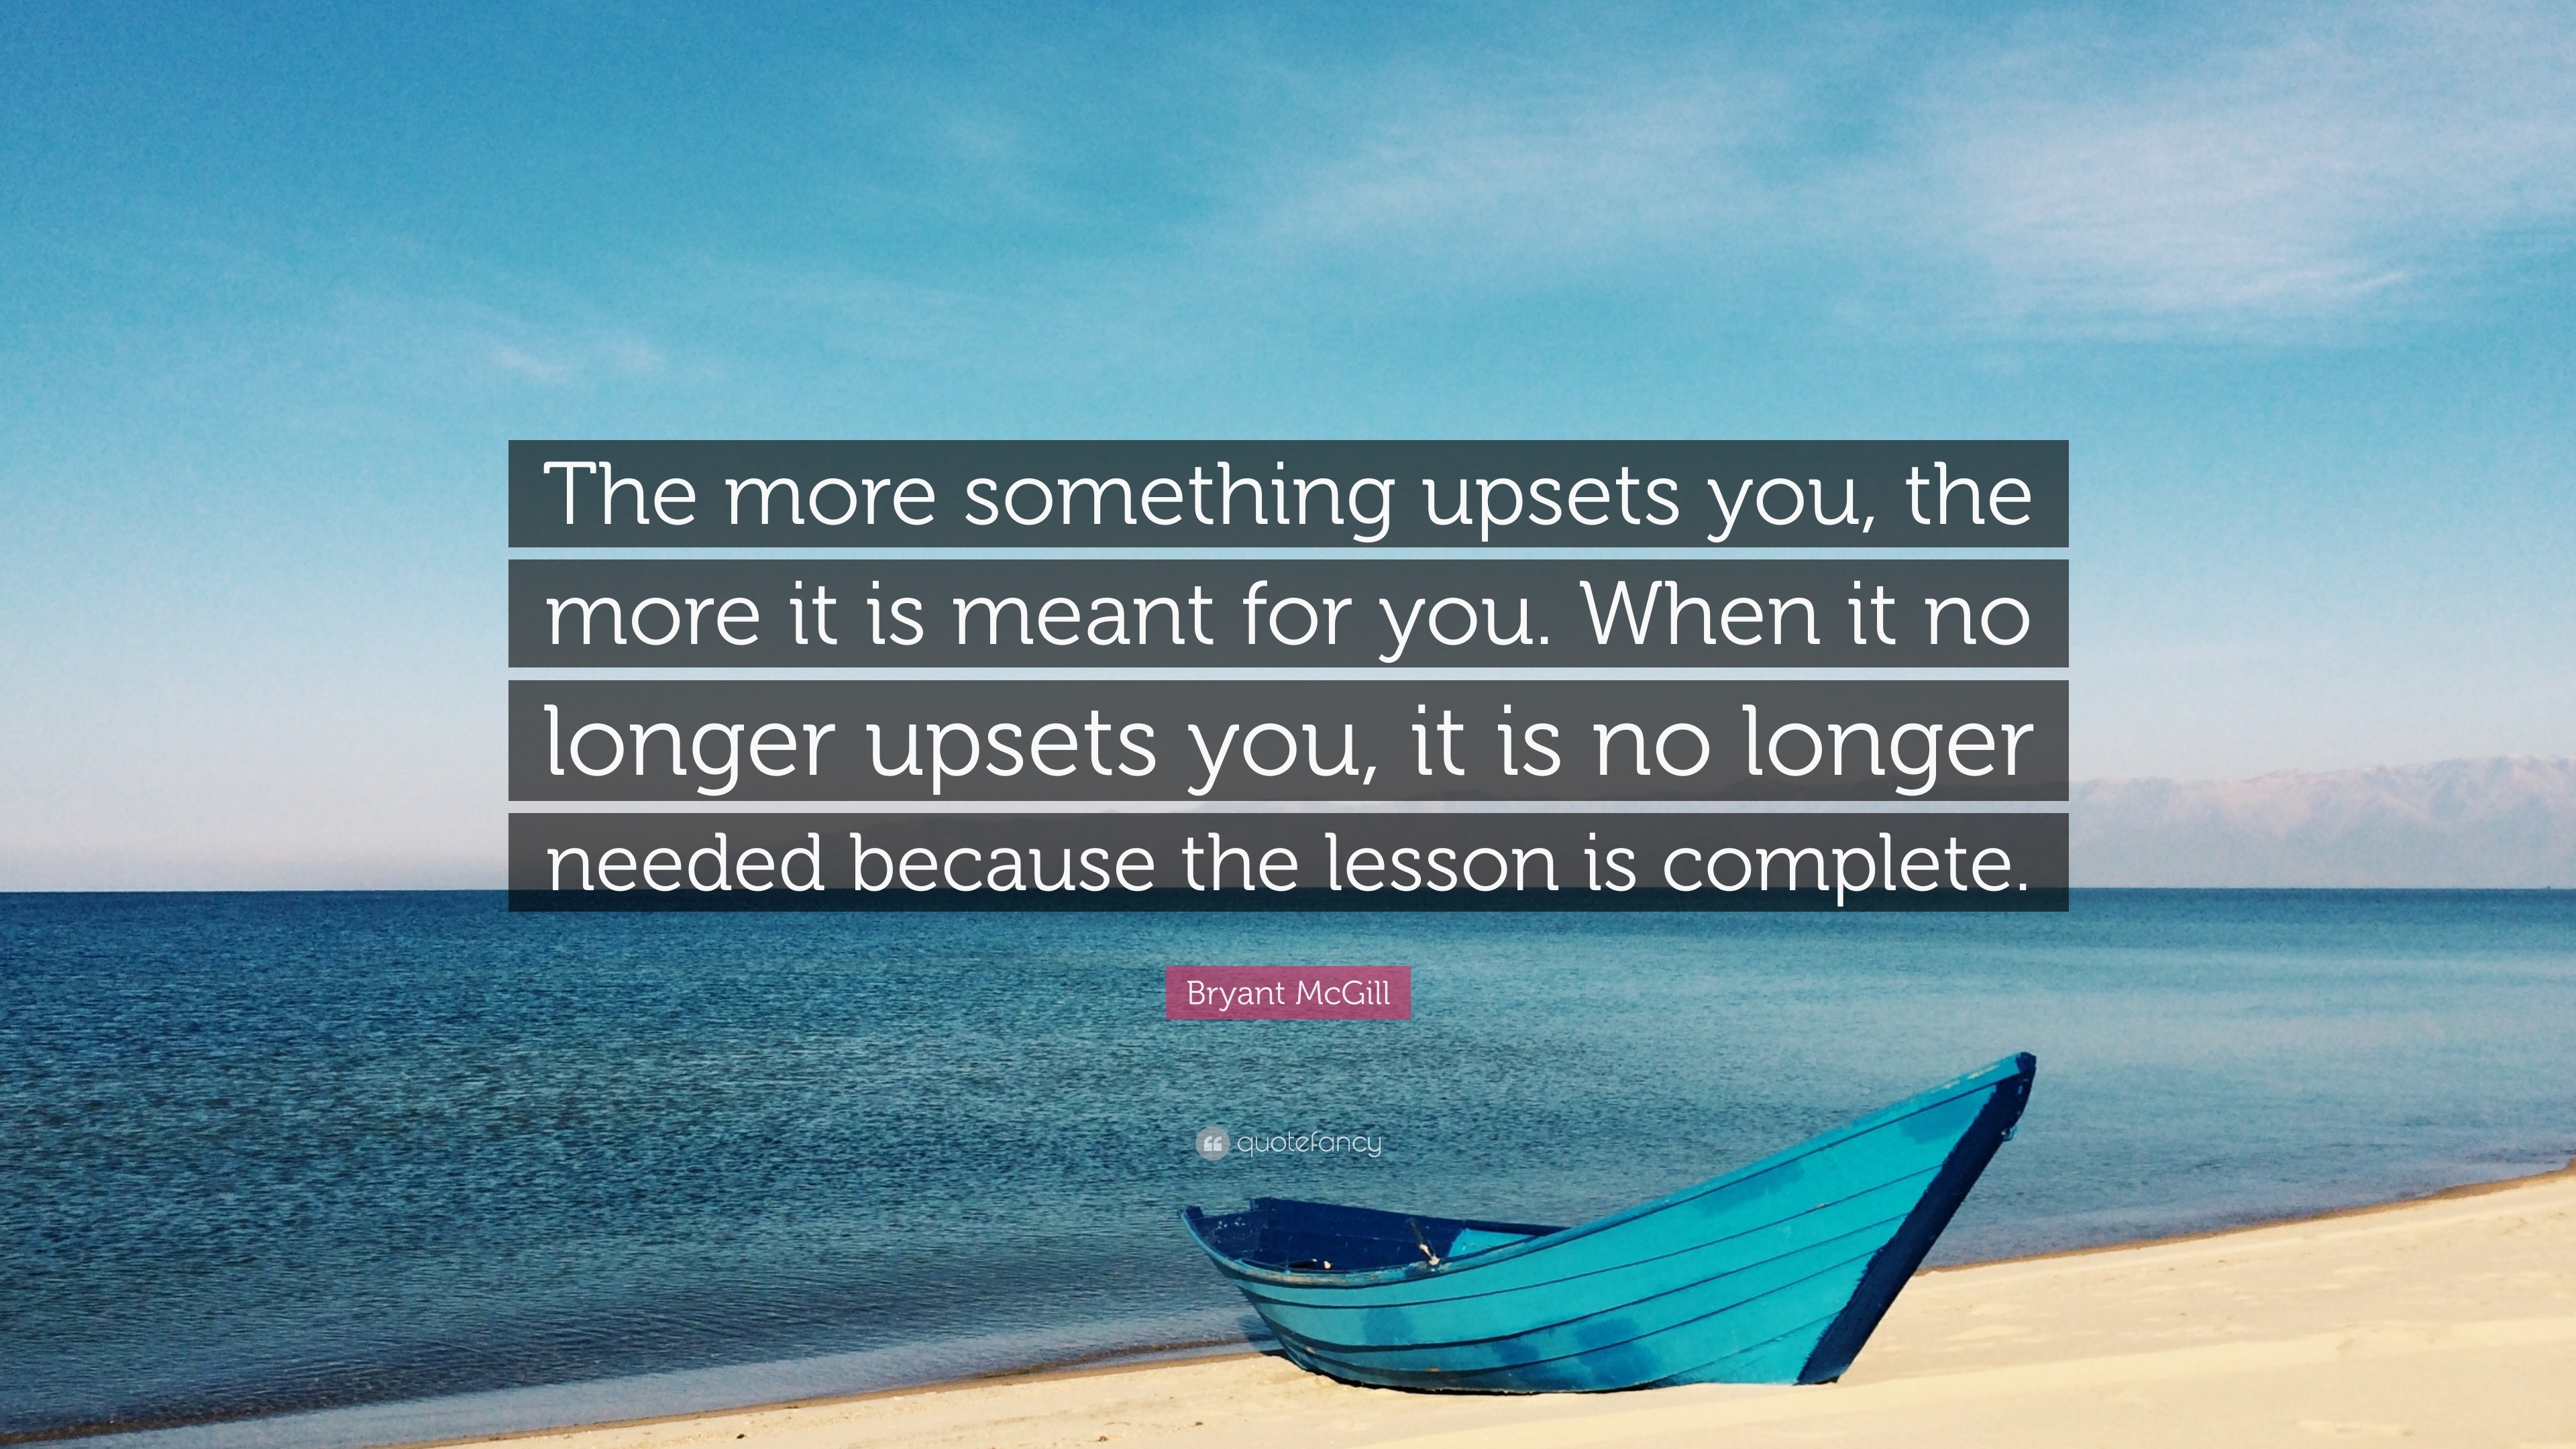 Bryant McGill Quote: “The more something upsets you, the more it is ...